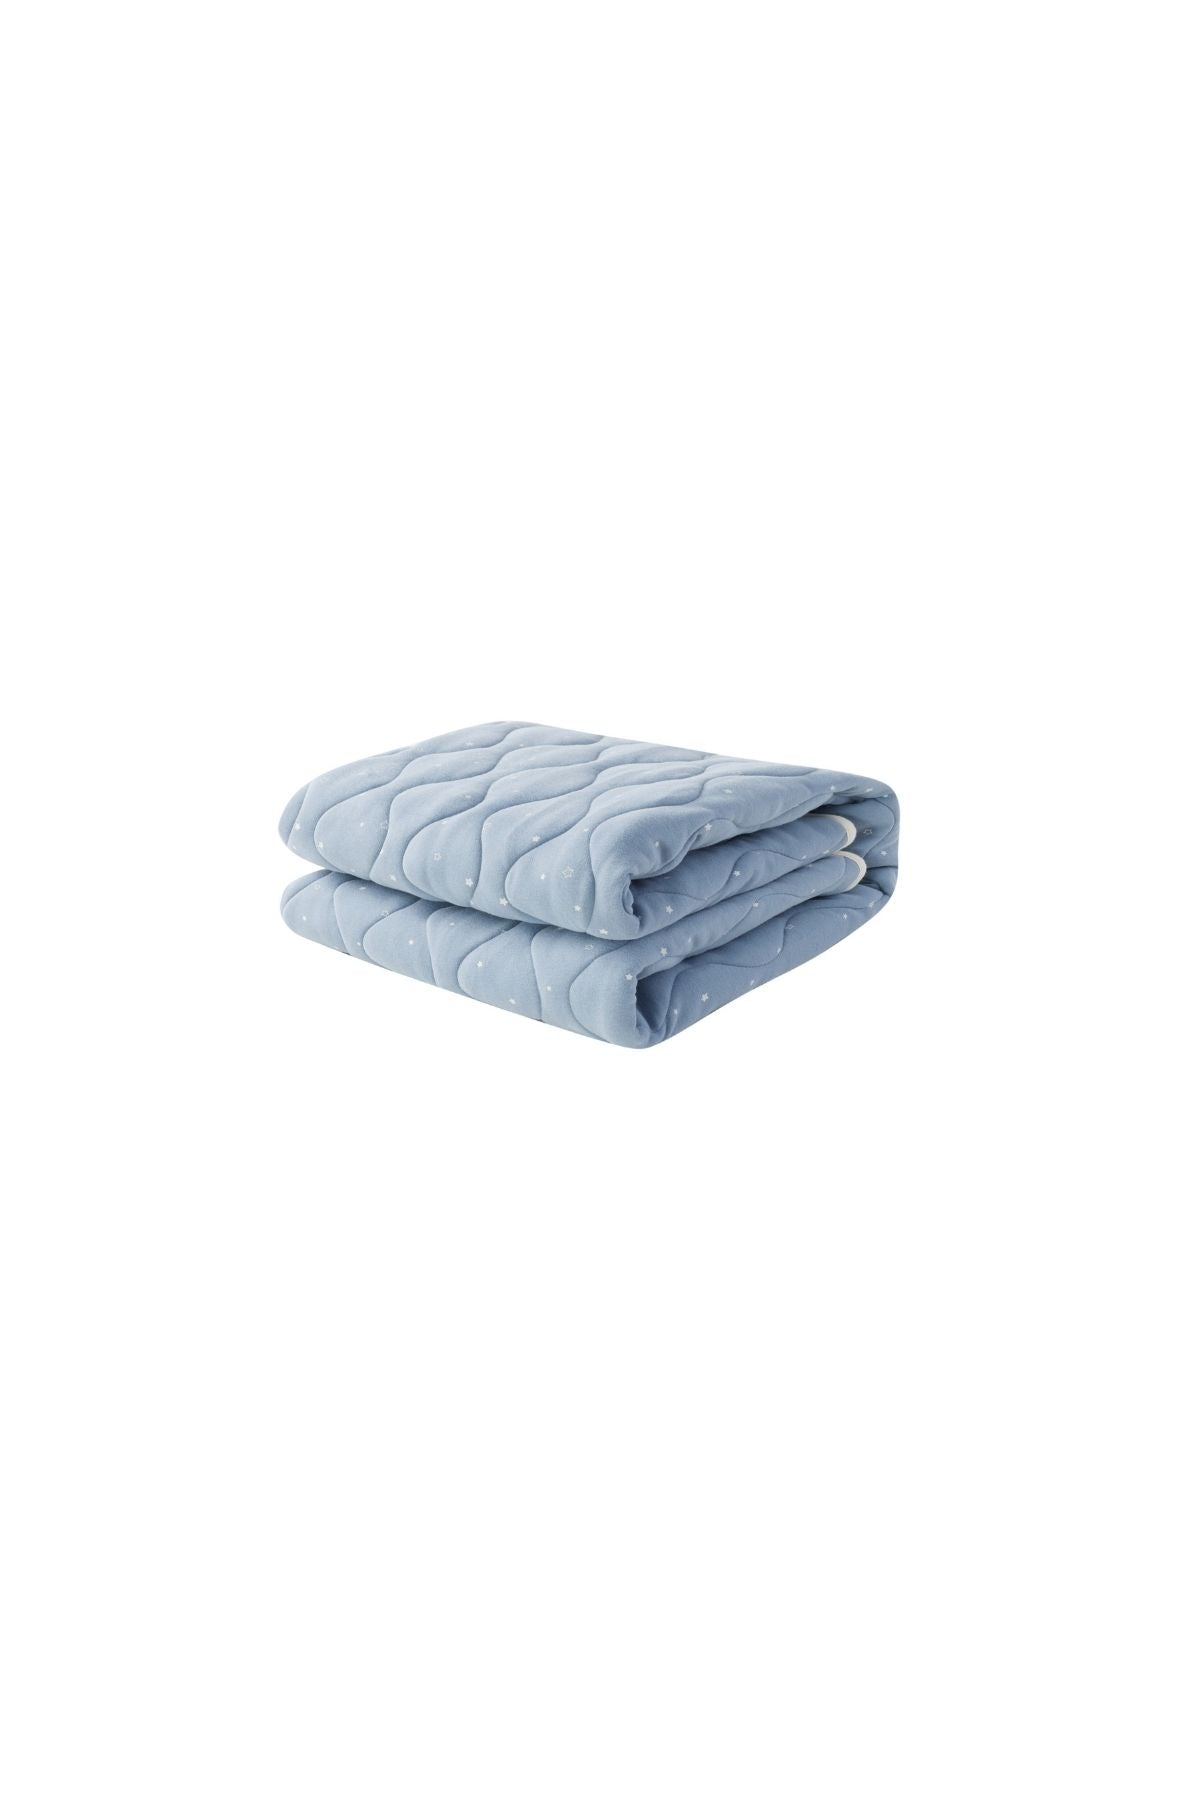 image for Organic Cotton Quilted Blanket-Blue Starry